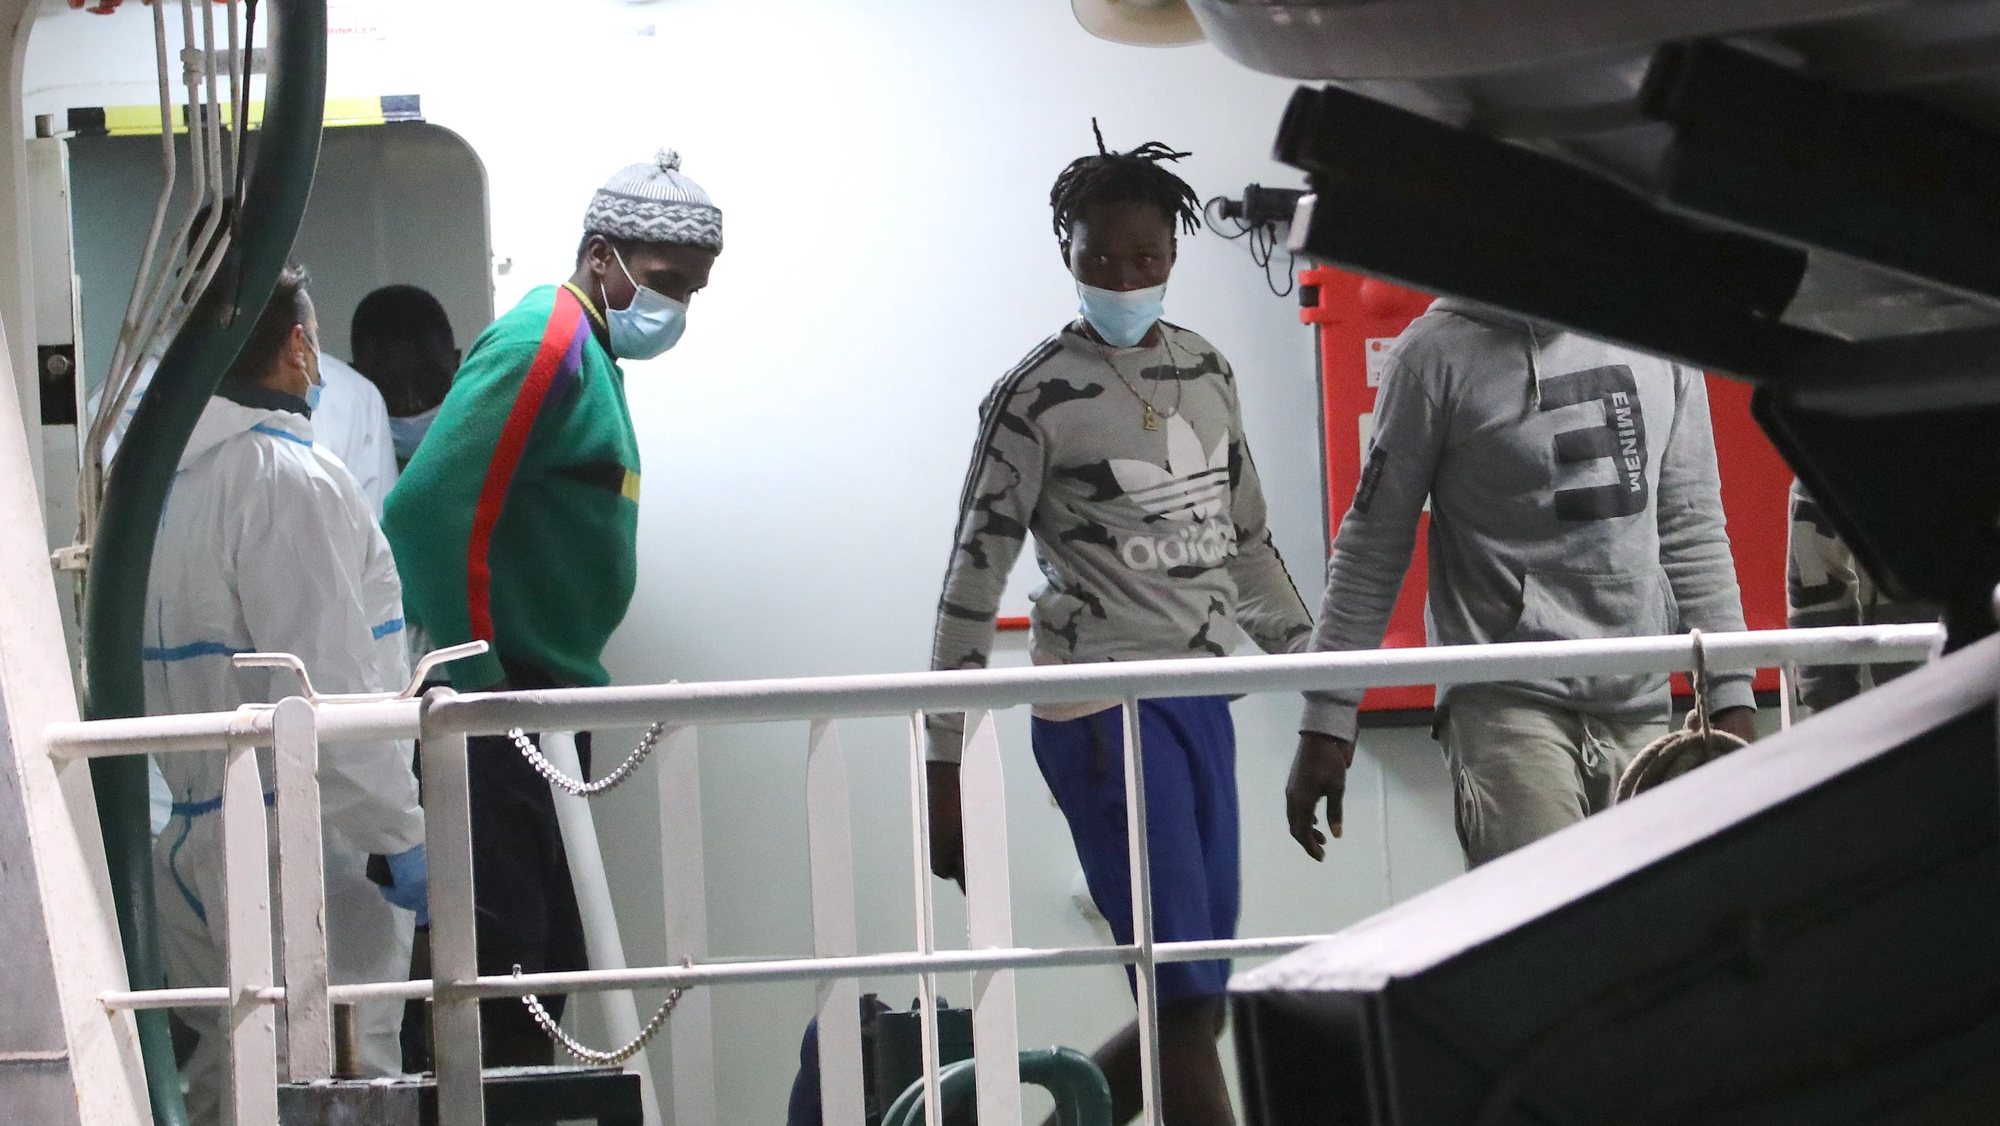 epa09551606 Some of the 30 rescued migrants disembark from the Guardia Civil&#039;s &#039;Rio Segura&#039; Ship in Las Palmas de Gran Canaria, Canary Islands, Spain, late 28 October 2021 (issued 29 October 2021). A total of 30 migrants were found some 200 miles south from the island.  EPA/ELVIRA URQUIJO A.